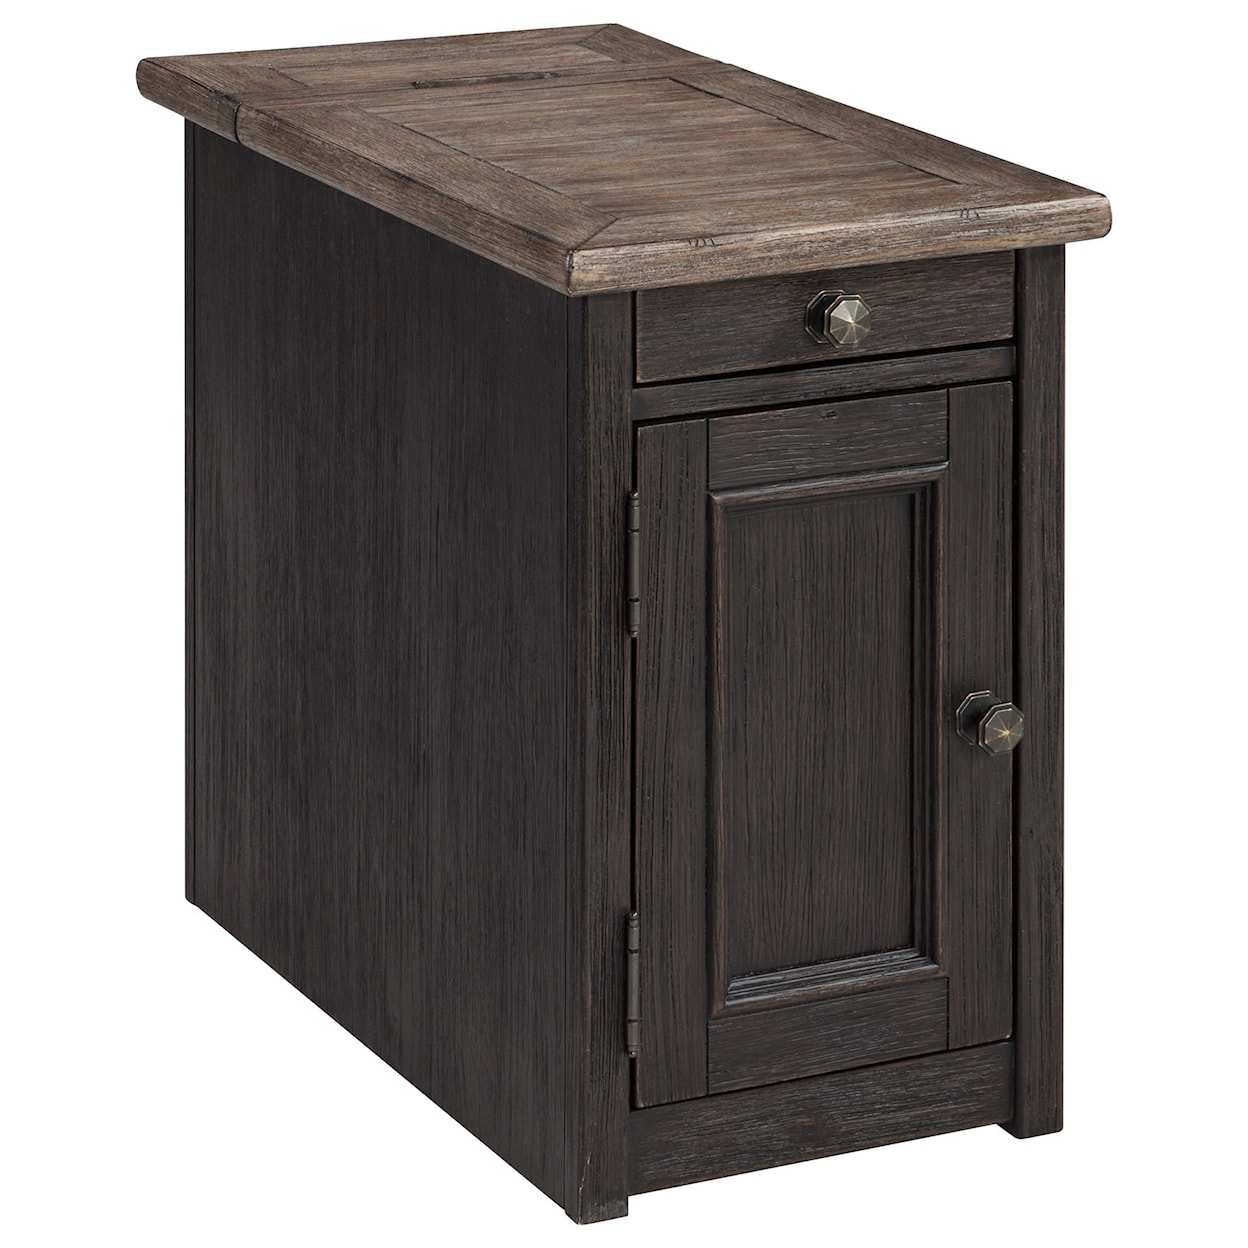 Benchcraft Tyler Creek Chair Side End Table